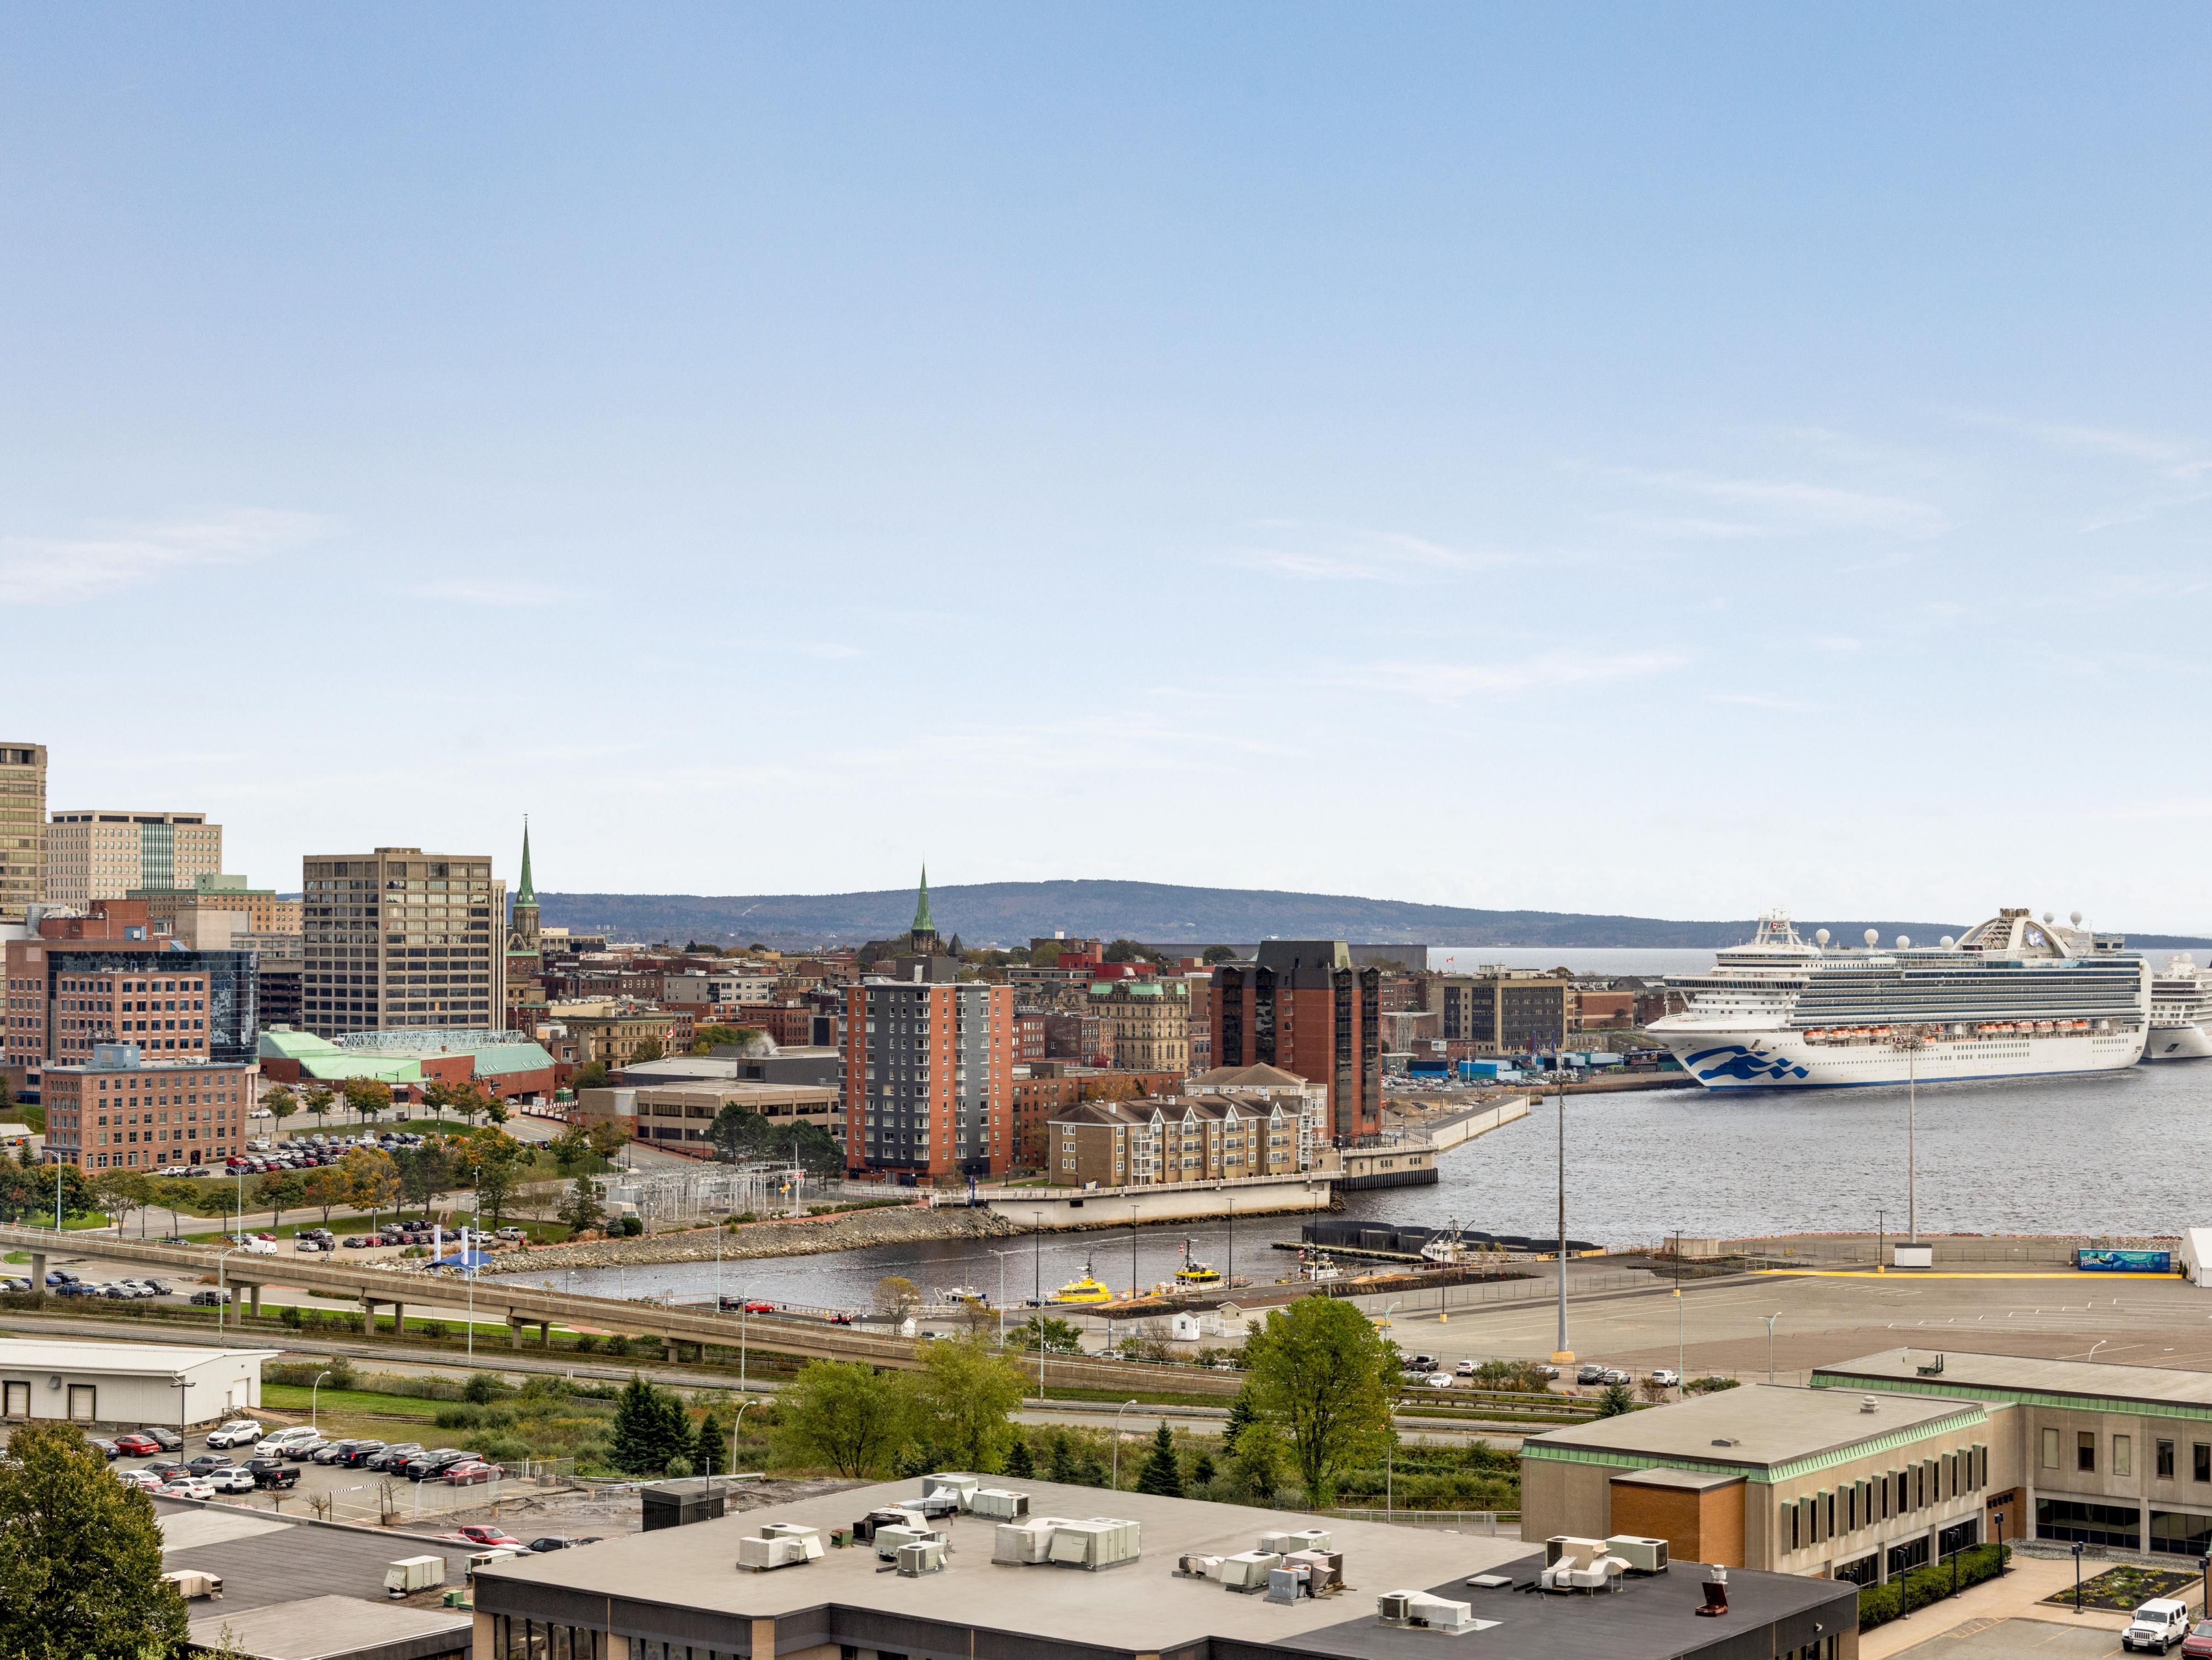 Nestled in a prime location, our Saint John Harbour View hotel provides easy access to uptown Saint John. Experience the magic of Saint John's picturesque harbour from our hotel, Stroll through the city's vibrant streets, explore local boutiques, savour diverse cuisines, and immerse yourself in the city's rich heritage. Your adventure starts here!